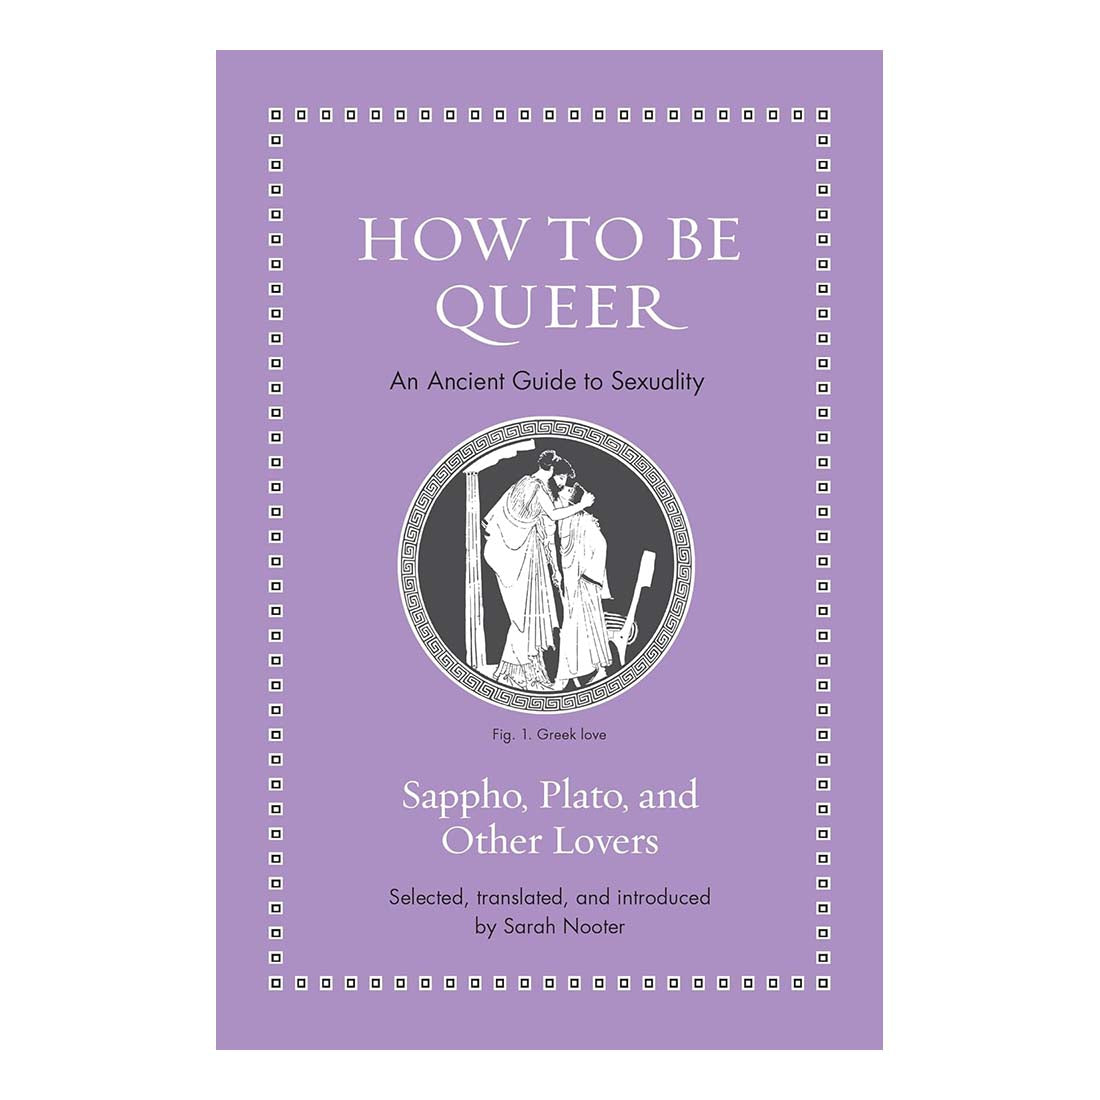 How to Be Queer: An Ancient Guide to Sexuality